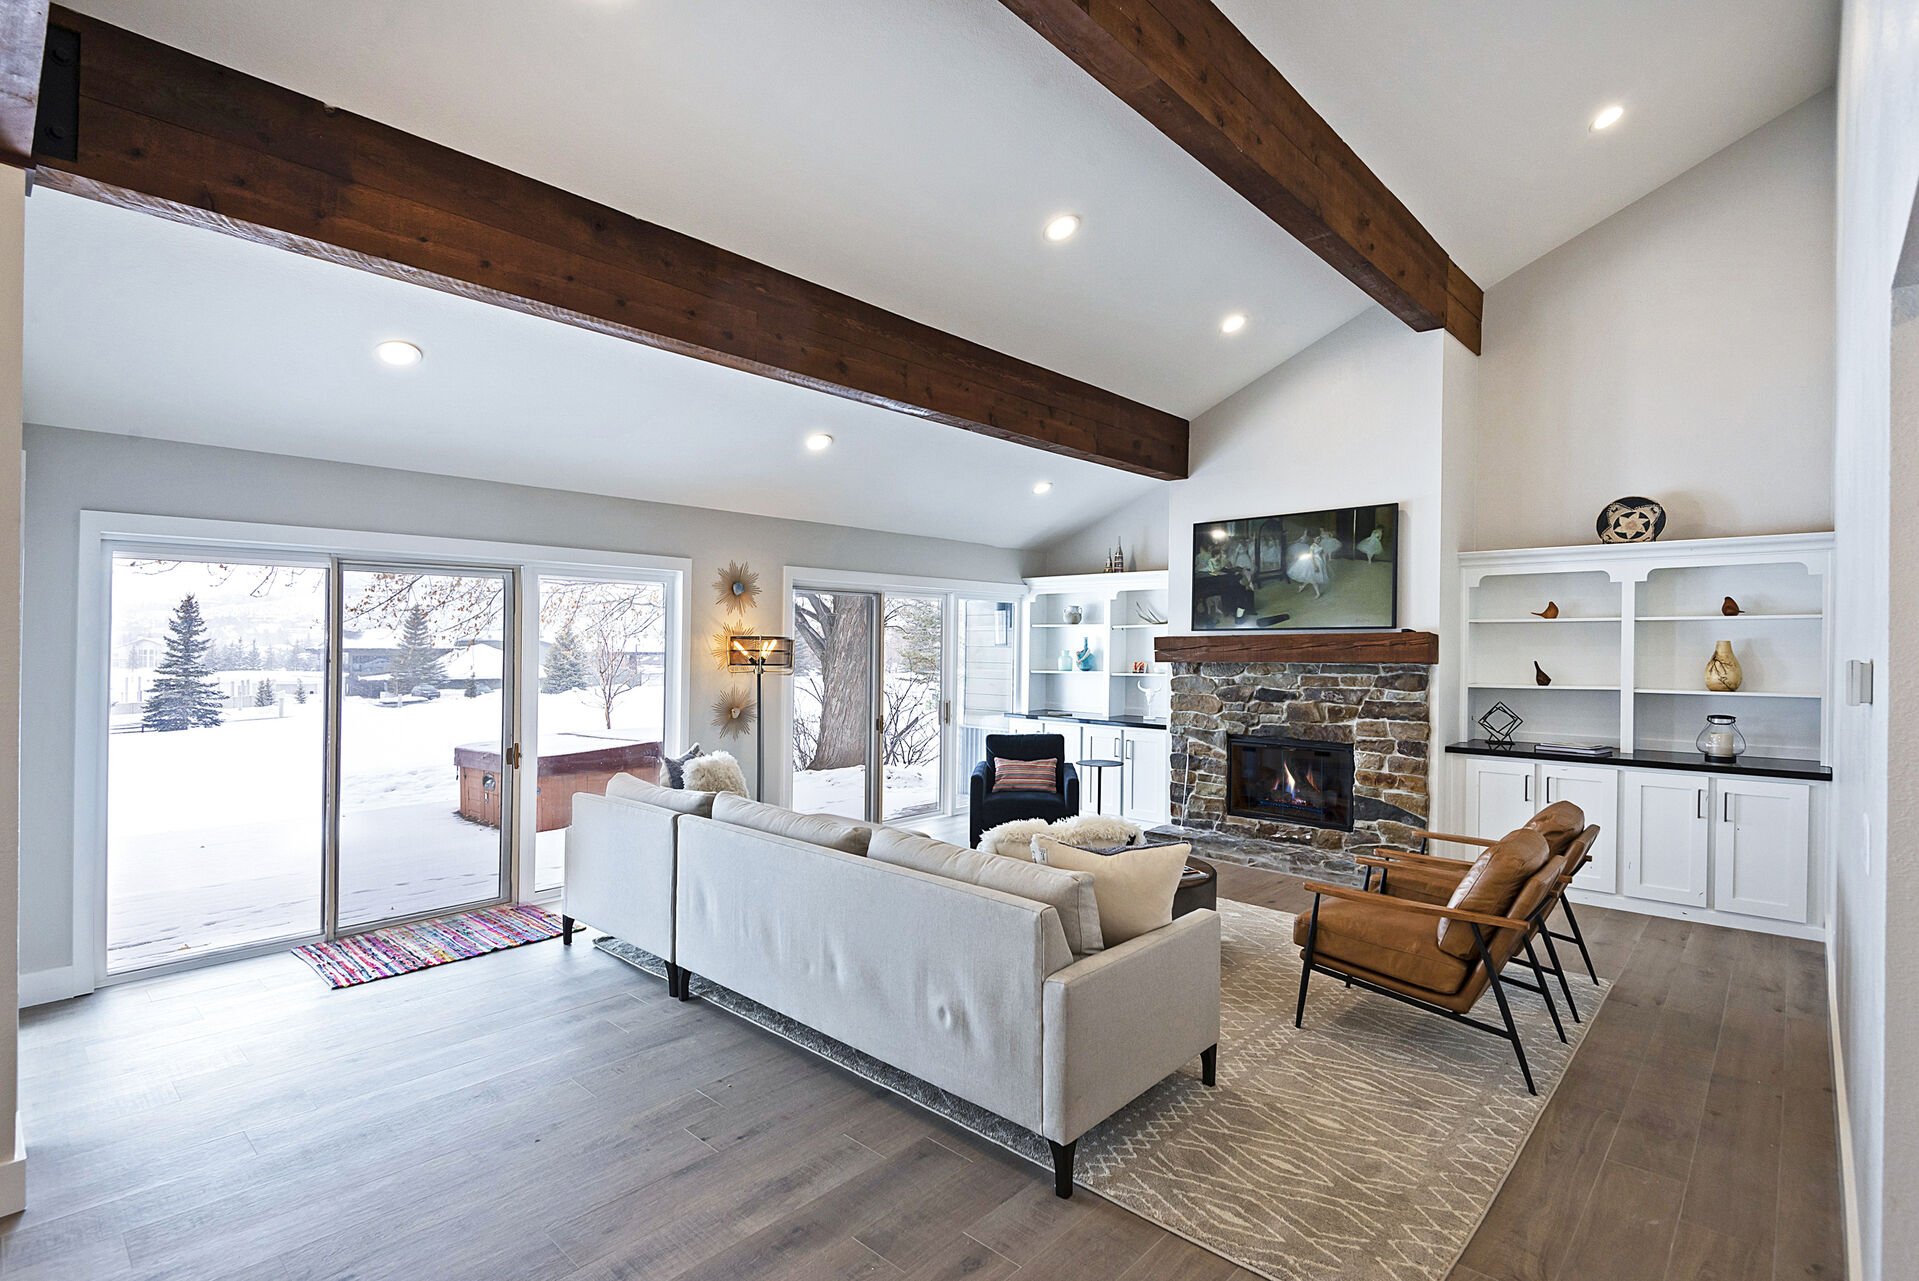 Living Room with Vaulted Ceilings, Comfortable Furnishings and Patio Access